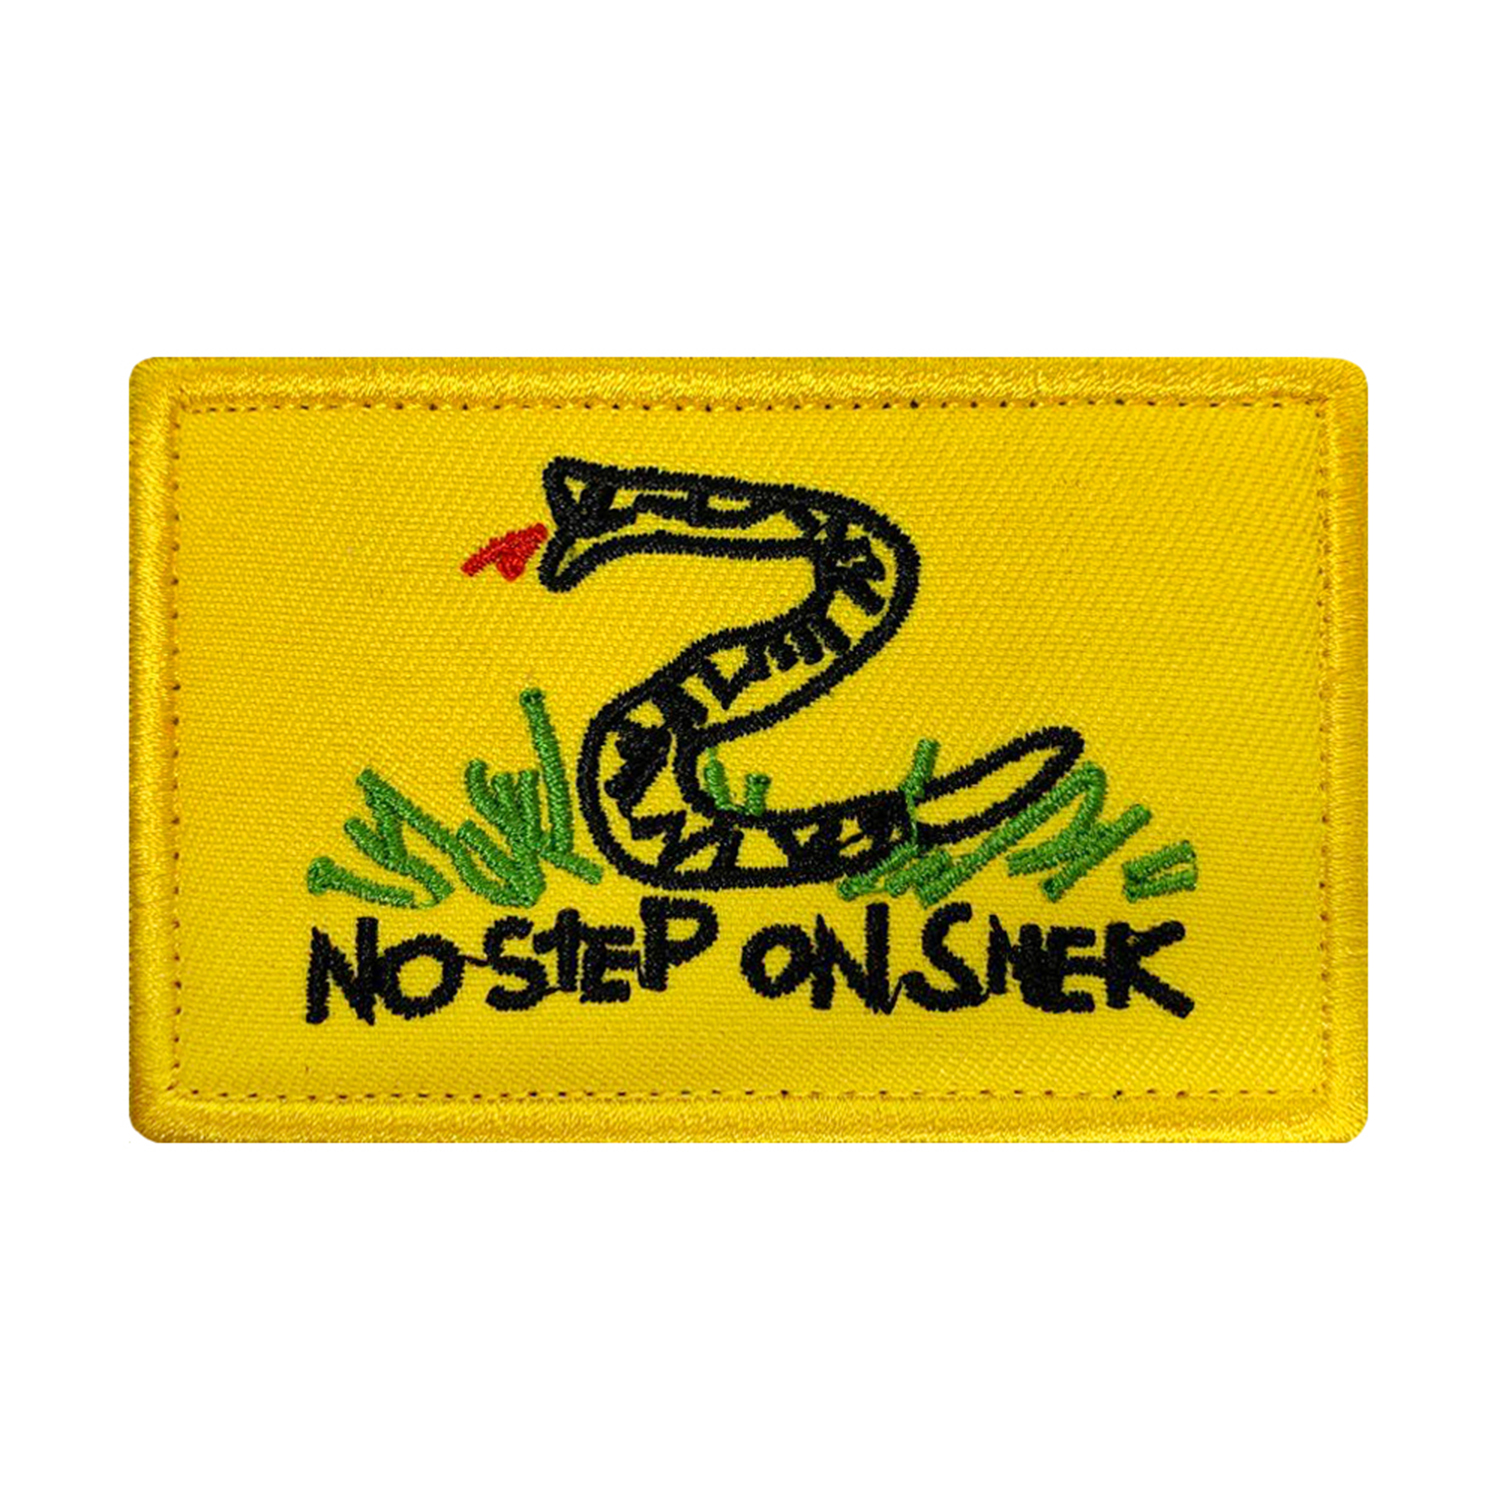 MORTHOME M No Step On Snek, Morale Patch Funny Tactical Morale Badge Hook  Loop Tactical Patch